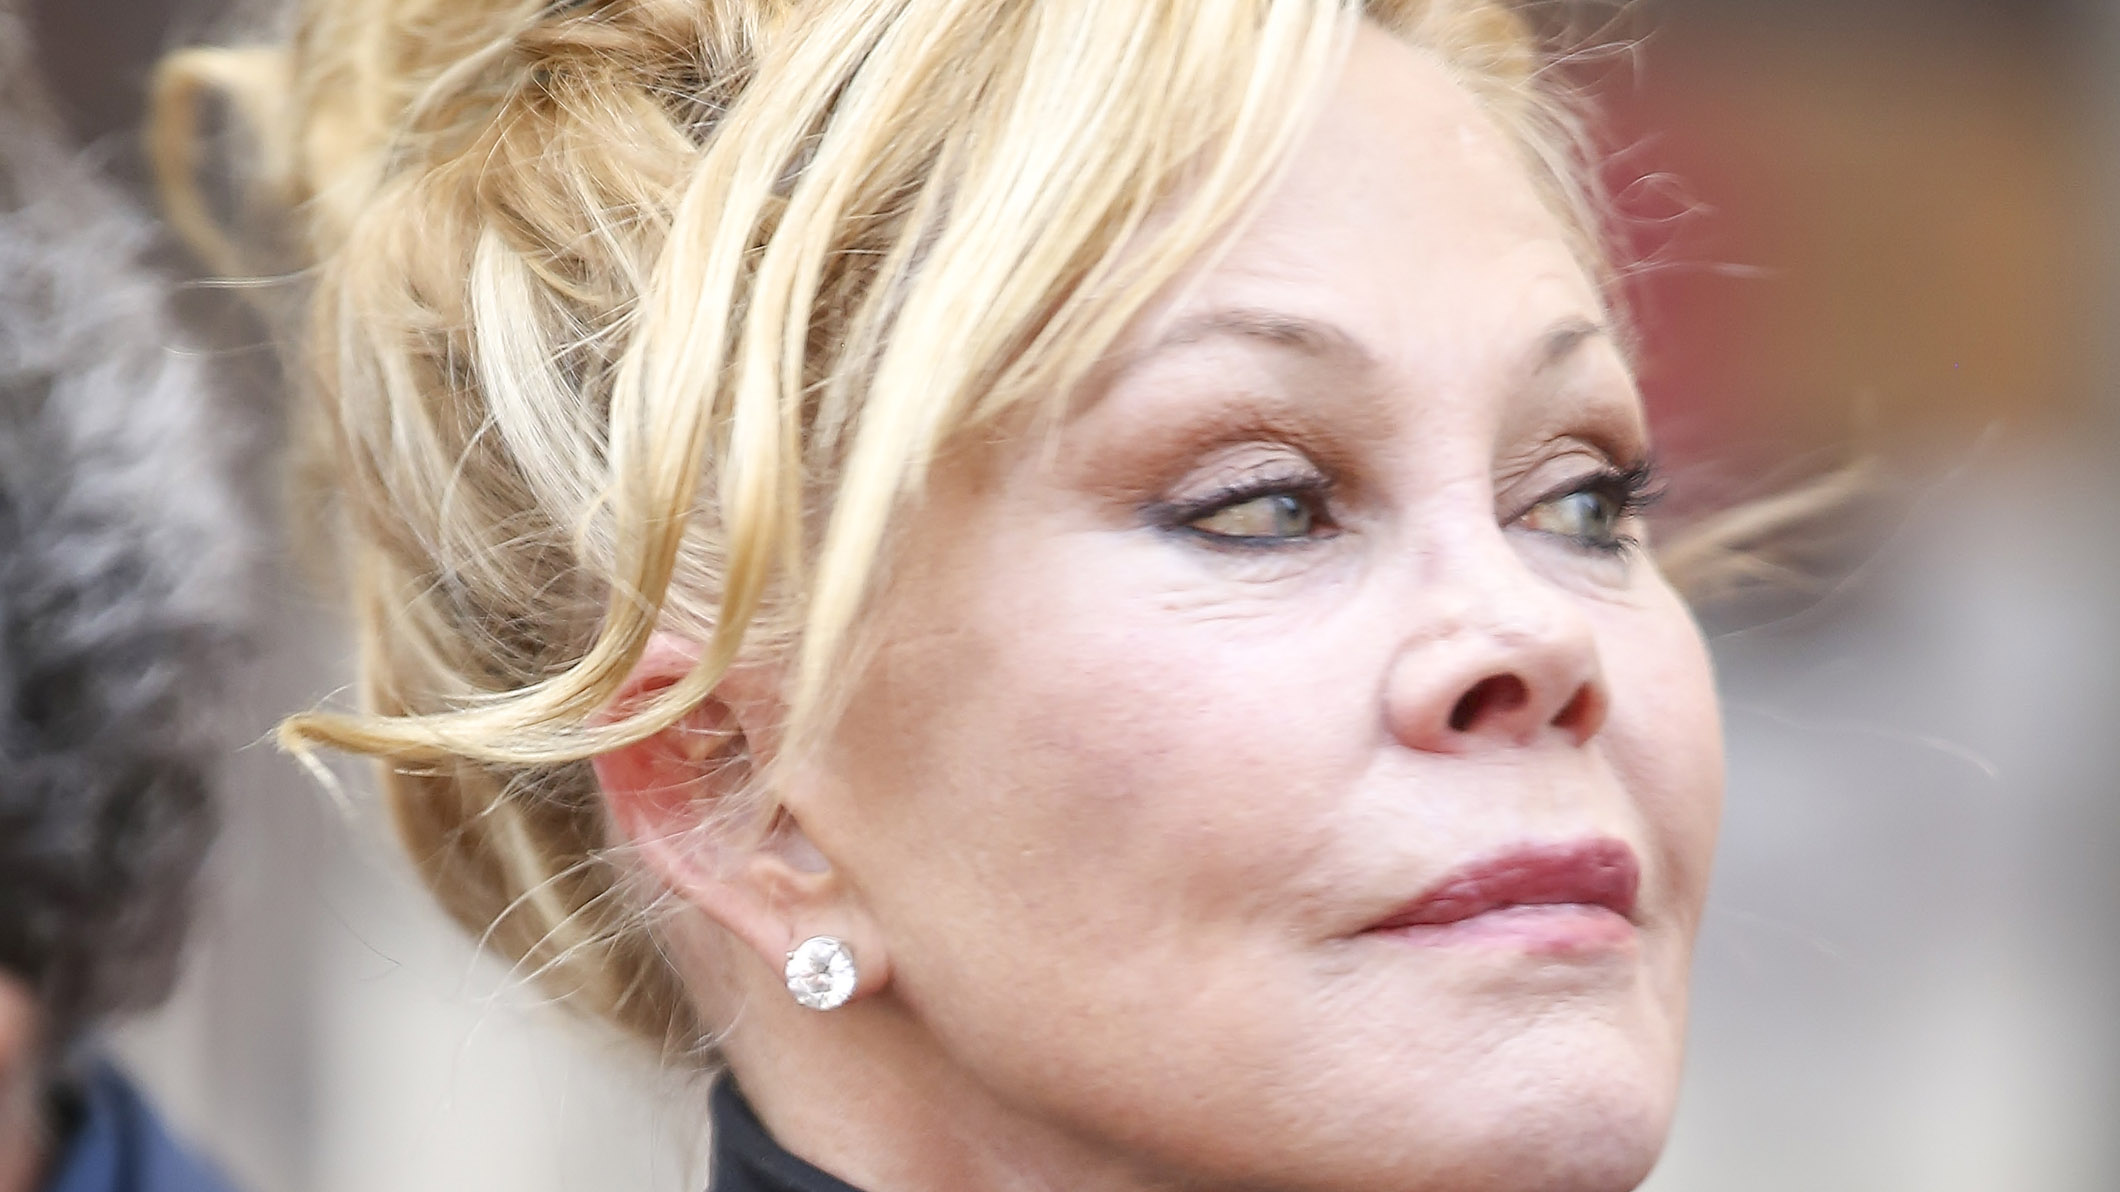 Recent picture of melanie griffith